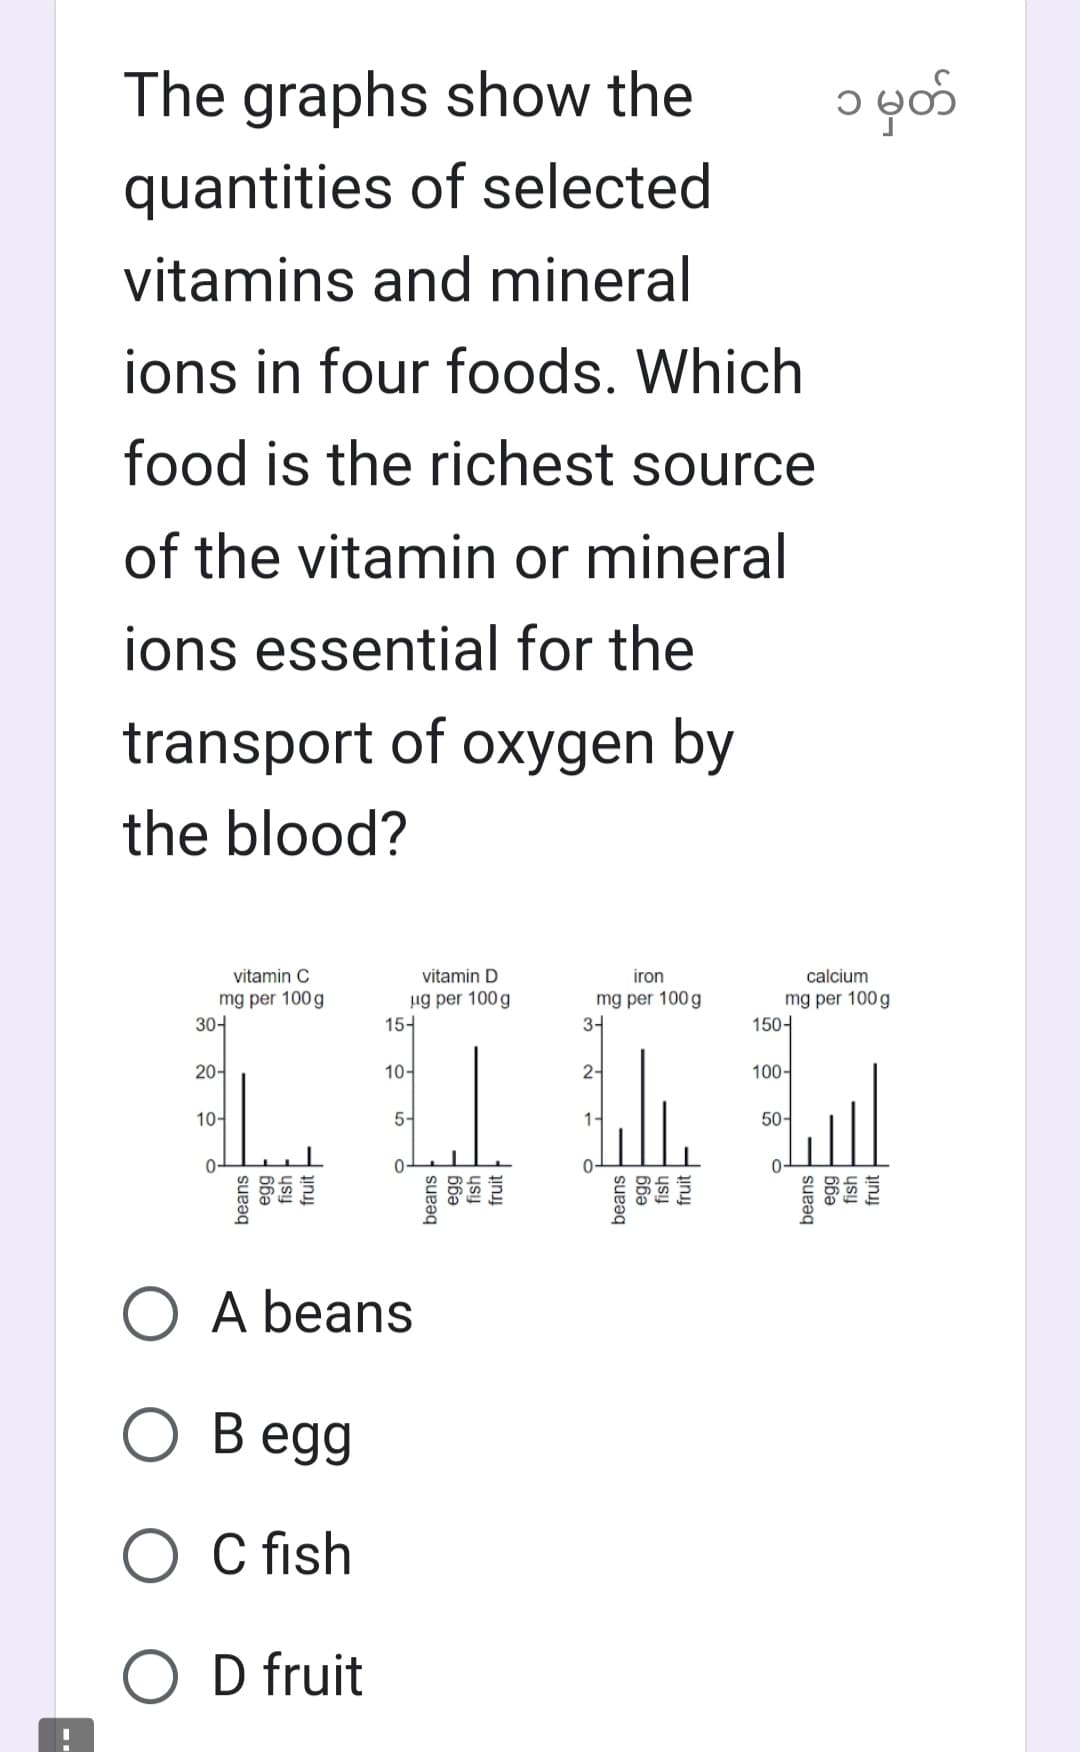 The graphs show the
quantities of selected
vitamins and mineral
ions in four foods. Which
food is the richest source
of the vitamin or mineral
ions essential for the
transport of oxygen by
the blood?
vitamin C
mg per 100g
30-
20-
10-
beans
66a
fish
fruit
vitamin D
ug per 100g
15-
10-
5-
O A beans
O Begg
O C fish
O D fruit
beans
66ə
fish
fruit
iron
mg per 100g
3-4
2-
1-
beans
66a
fish
fruit
calcium
mg per 100g
150-
100-
50-
၁ မှတ်
0-
beans
egg
fish
fruit